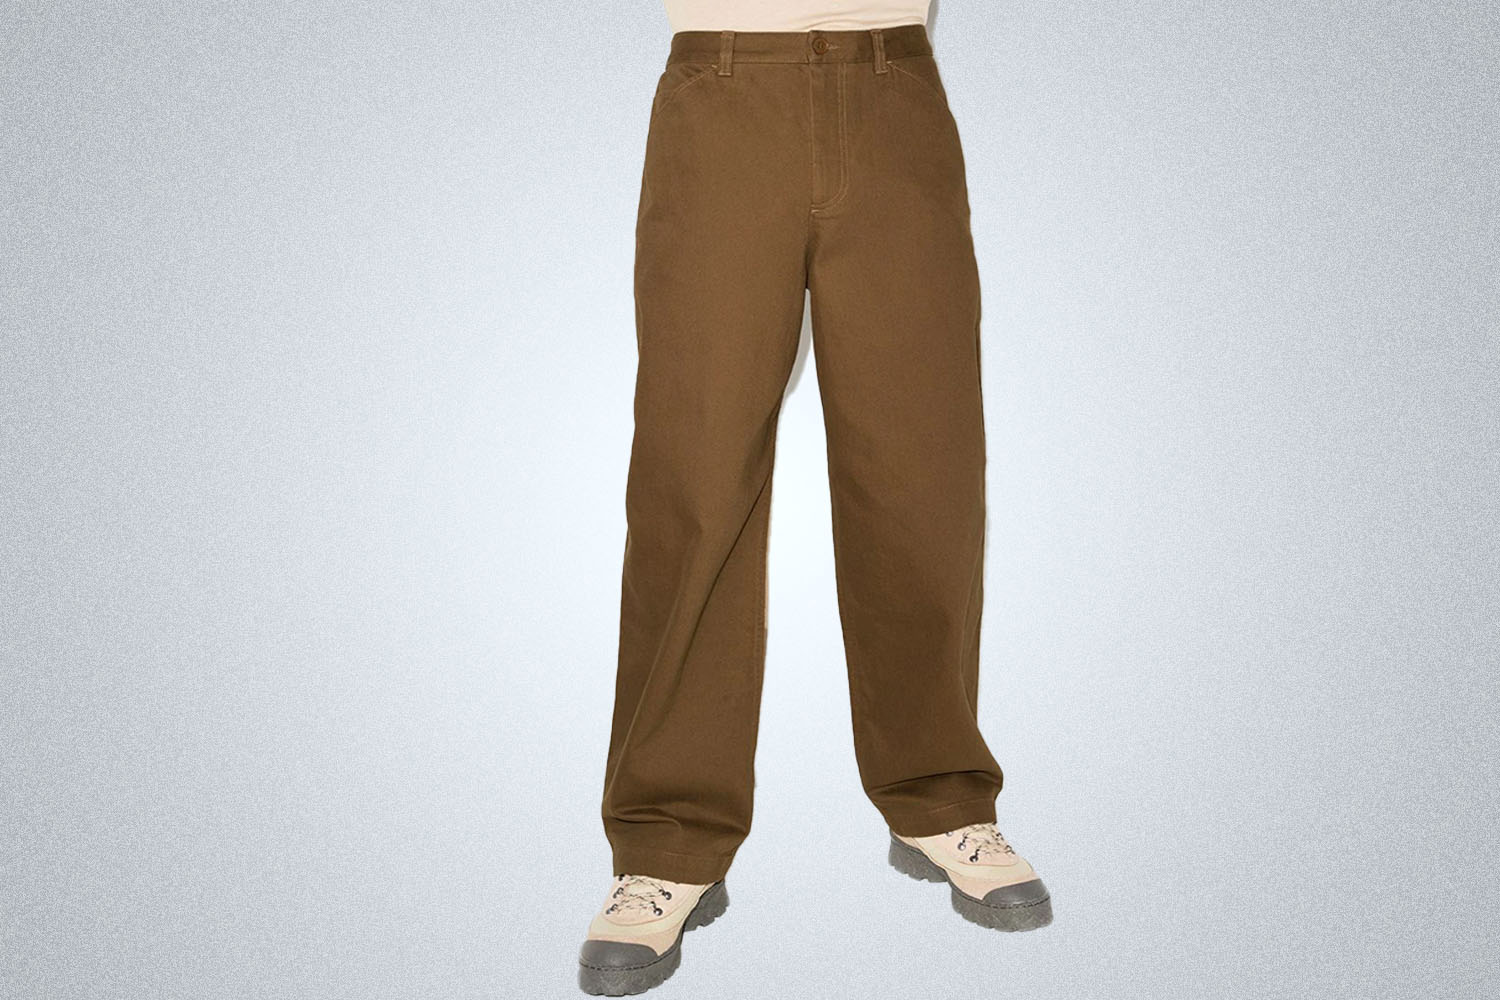 a pair of chinos